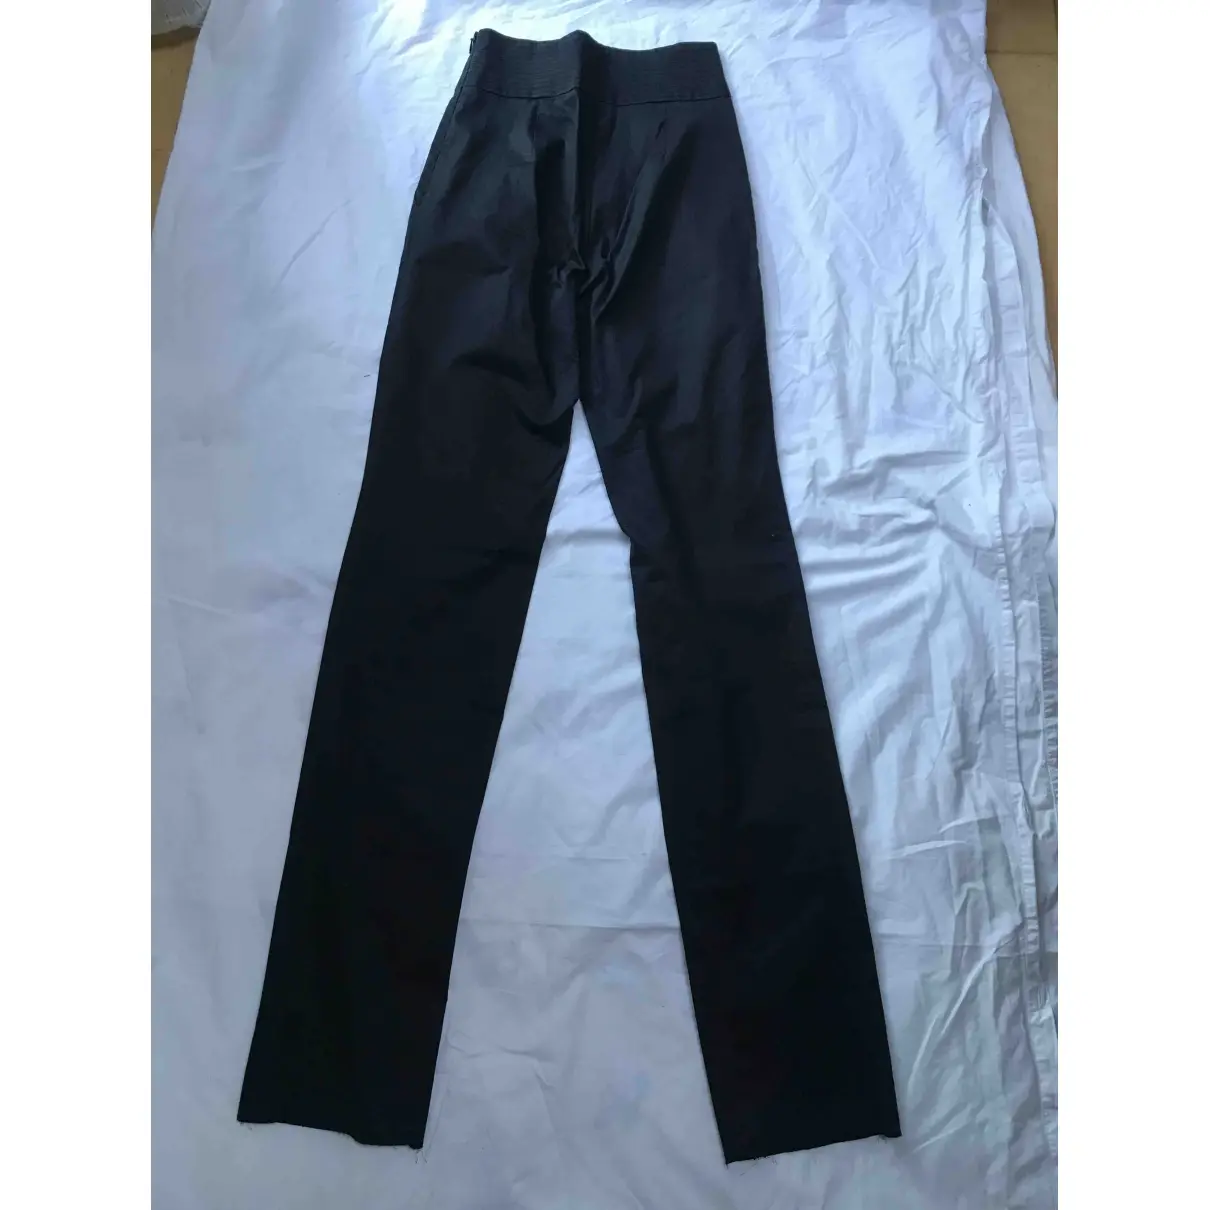 Karl Lagerfeld Straight pants for sale